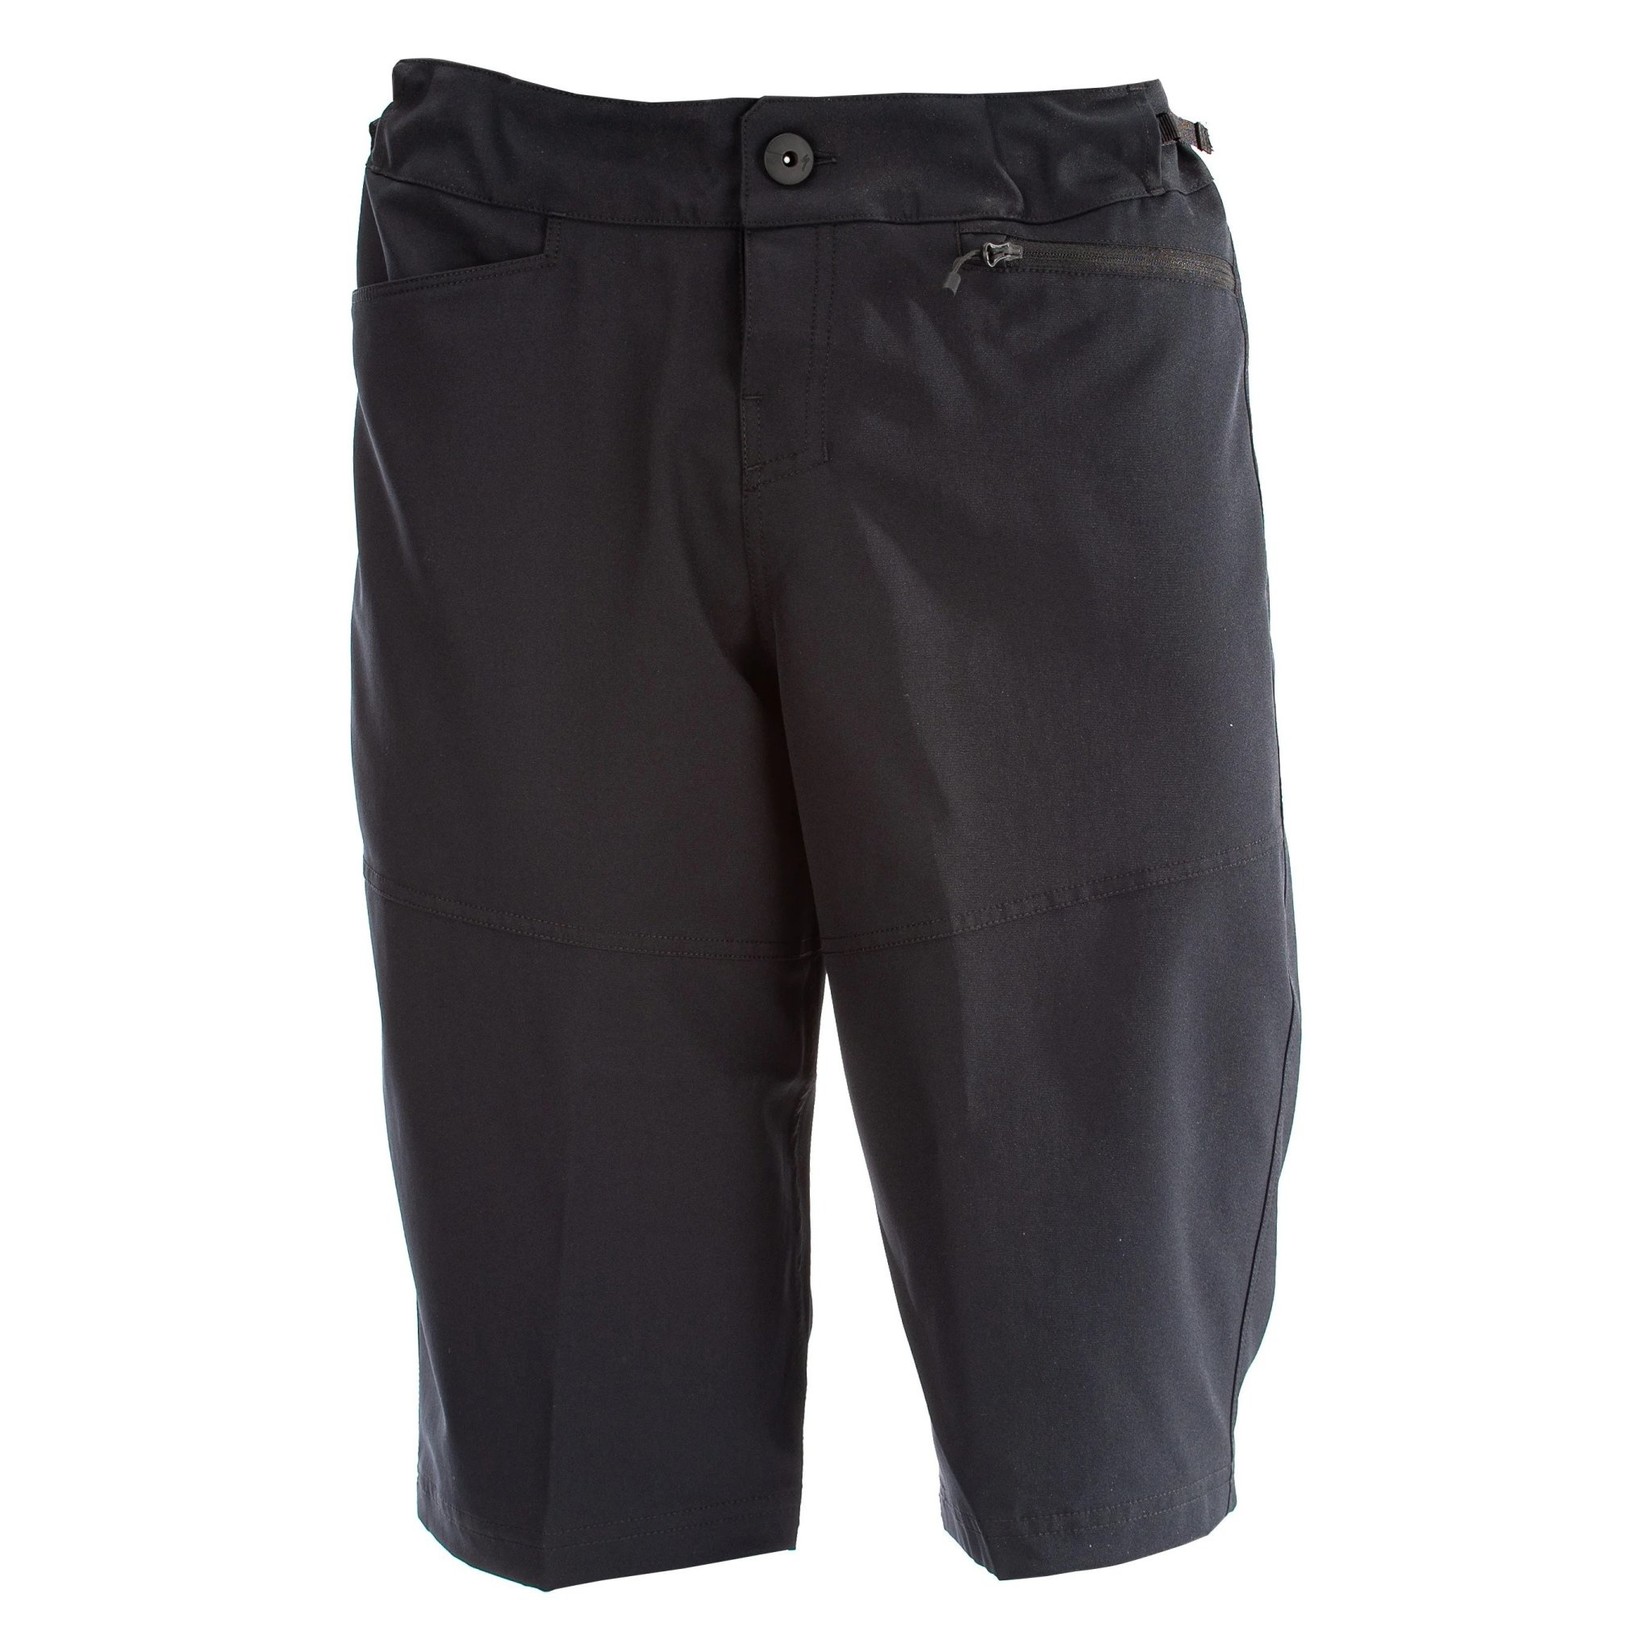 Specialized Trail Short w/ Liner